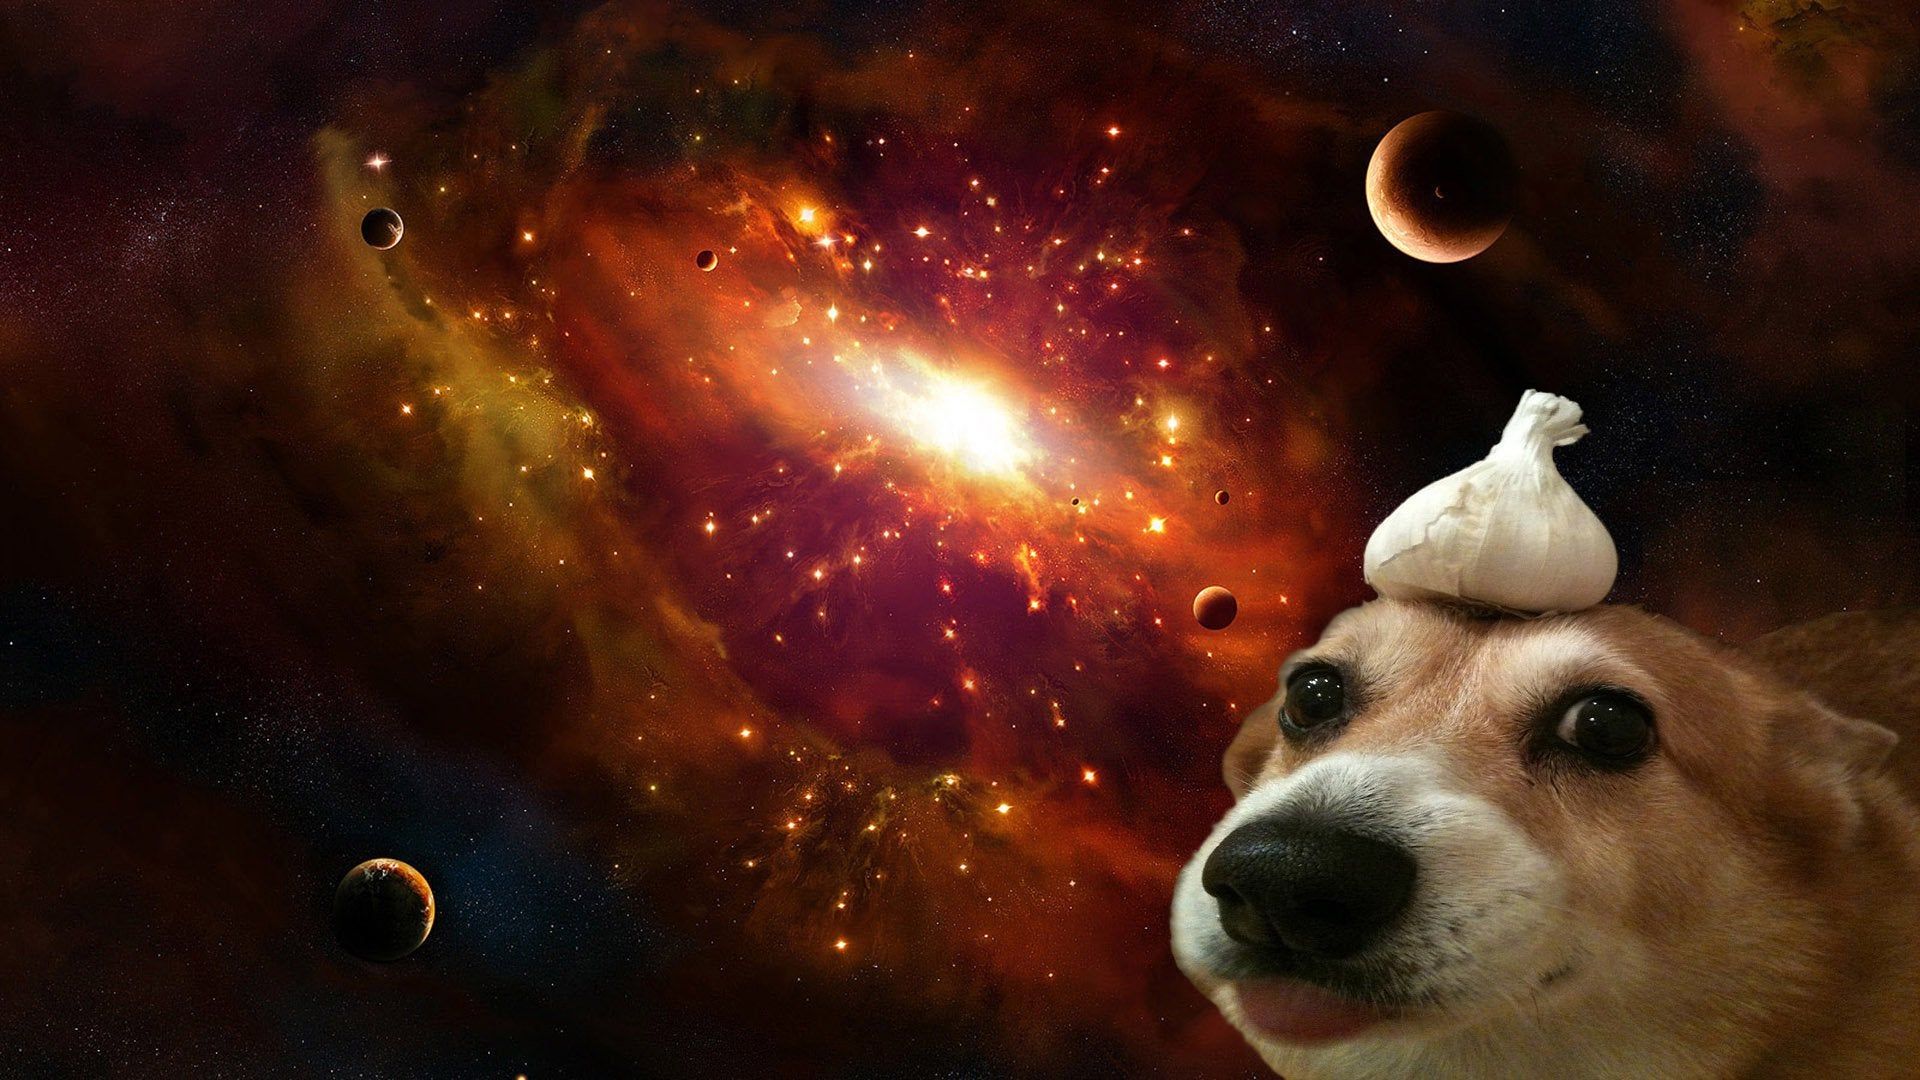 A dog with garlic on its' head in space [1920x1080]